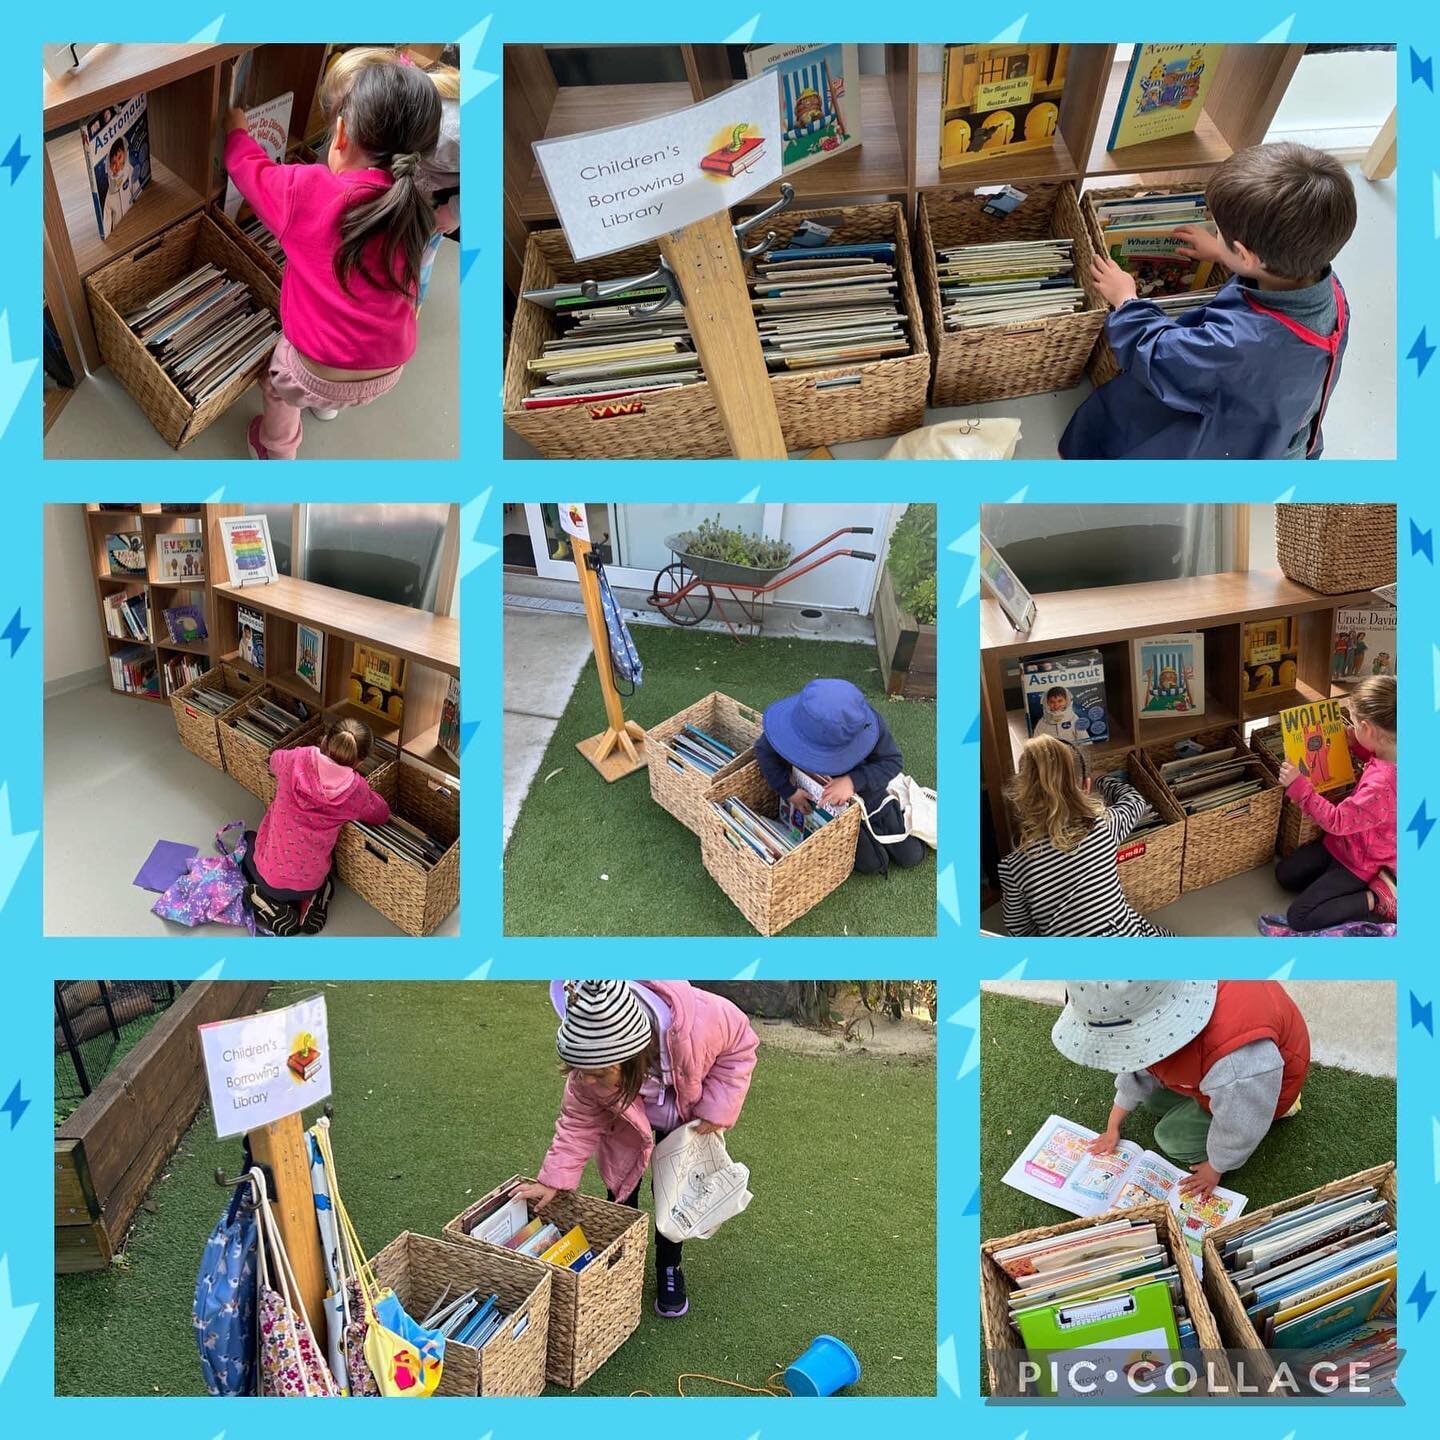 Our Borrowing Library 📚 Each week the children love to explore, investigate and choose books to take home and read with their family. 
Having access to our take home book library, fosters and promotes literacy and language development whilst at home